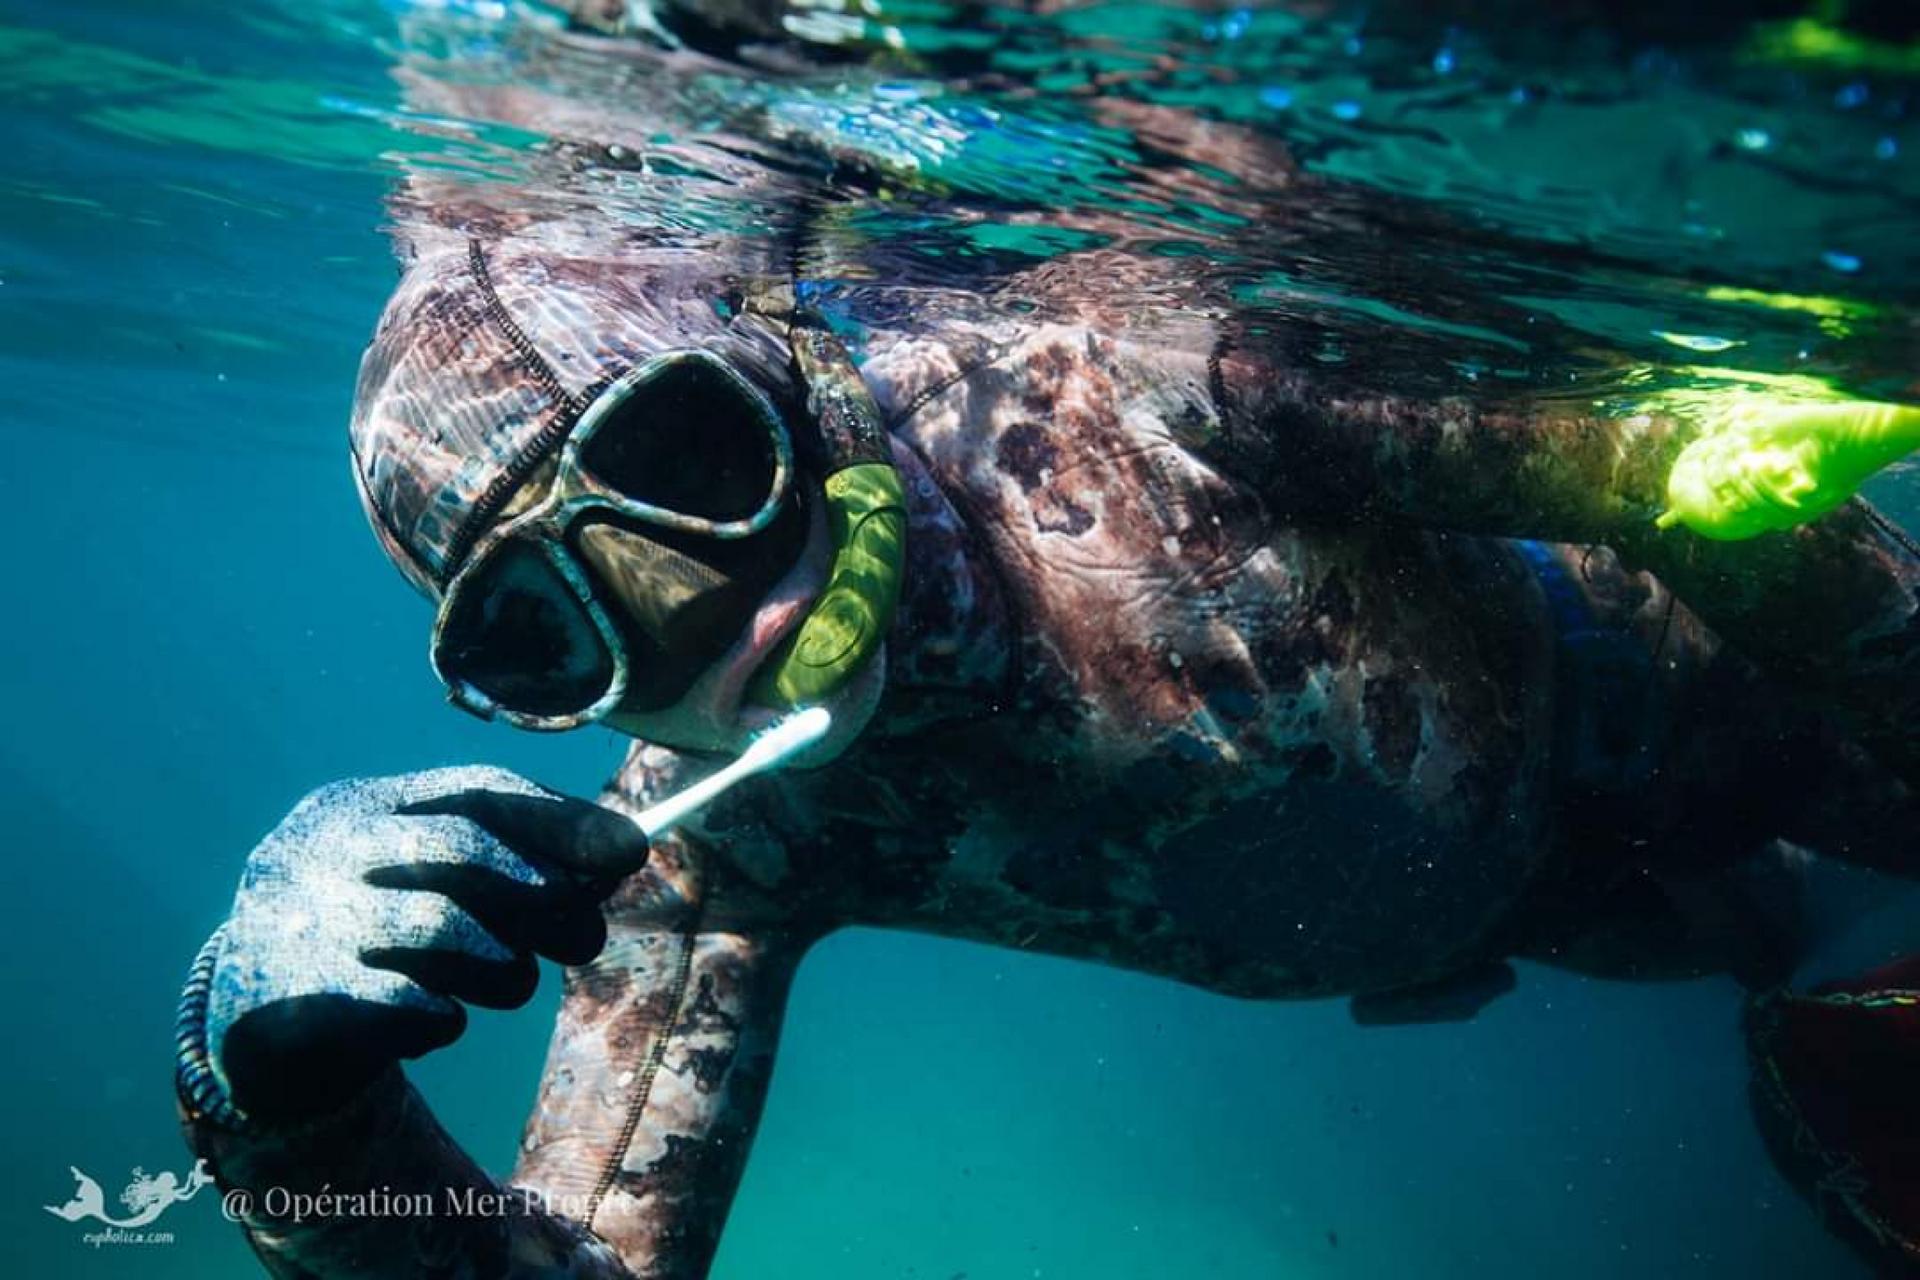 Joko Peltier, cofounder of France's Operation Clean Sea, shows a toothbrush he found underwater while clearing litter.